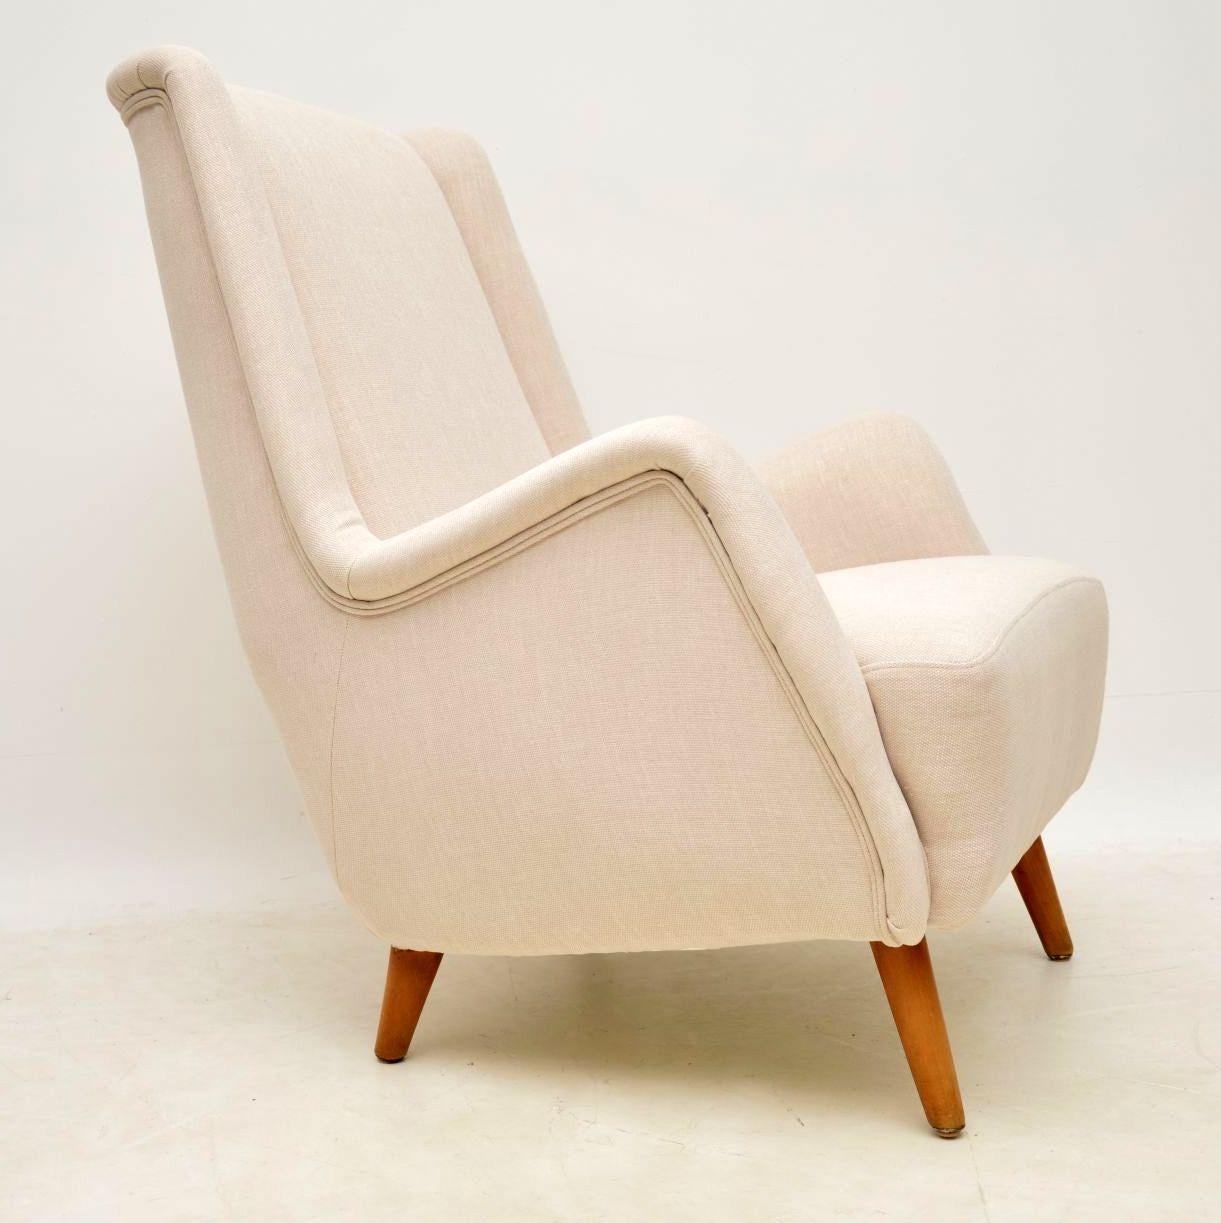 A beautifully made, stylish and very comfortable vintage armchair, this was made in Sweden during the 1960s, it was designed by Alf Svensson. It has a lovely shape and sits on very solid splayed beech legs. We have had this fully re-upholstered in a